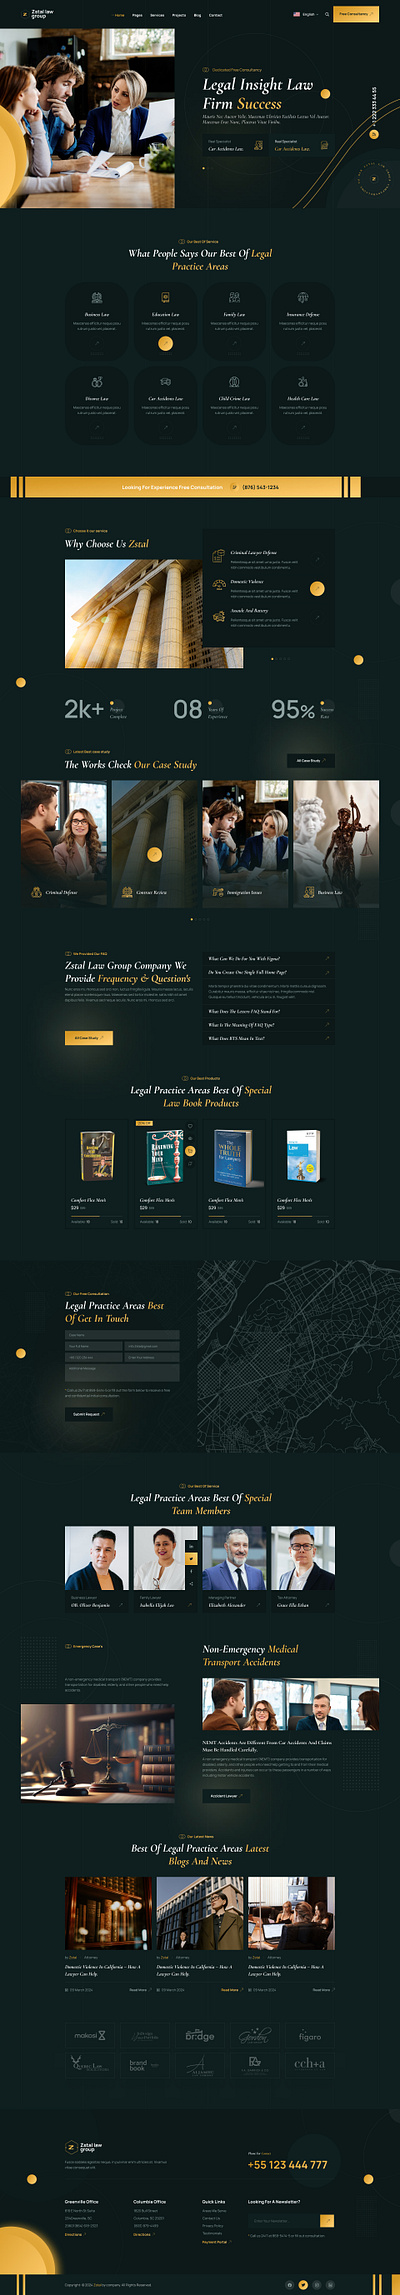 Law Group Home Page template